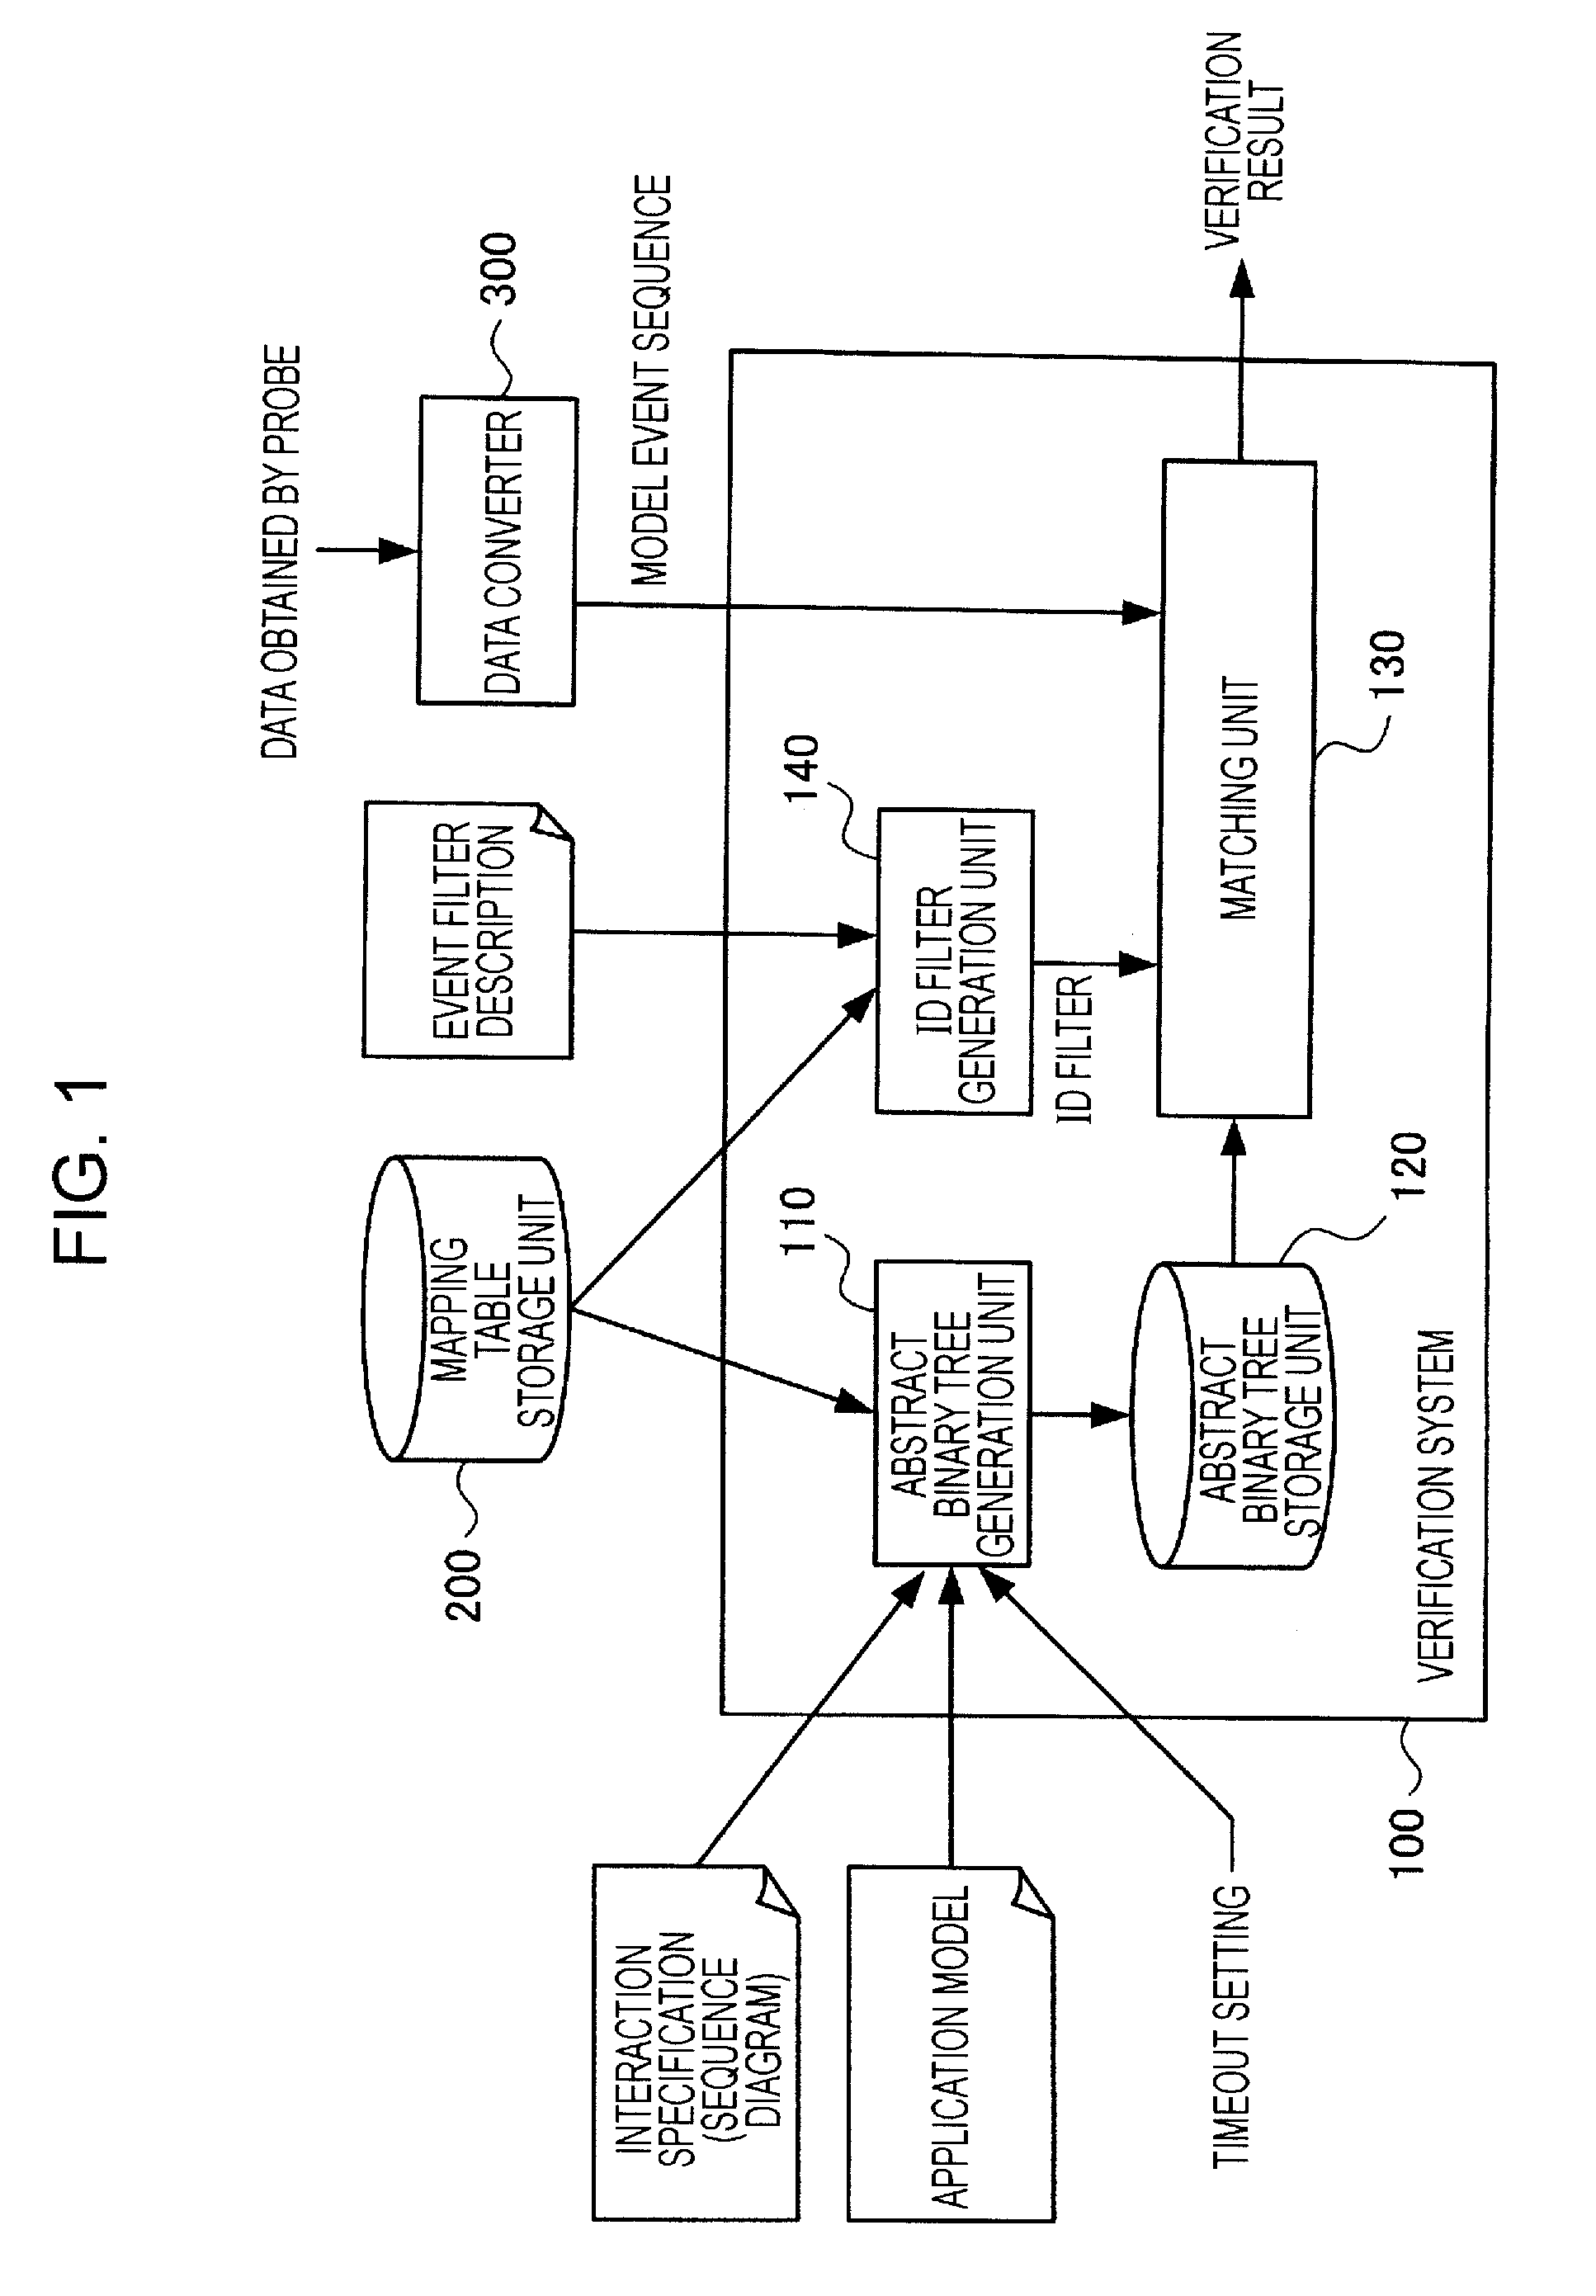 System and method for verifying operation of a target system